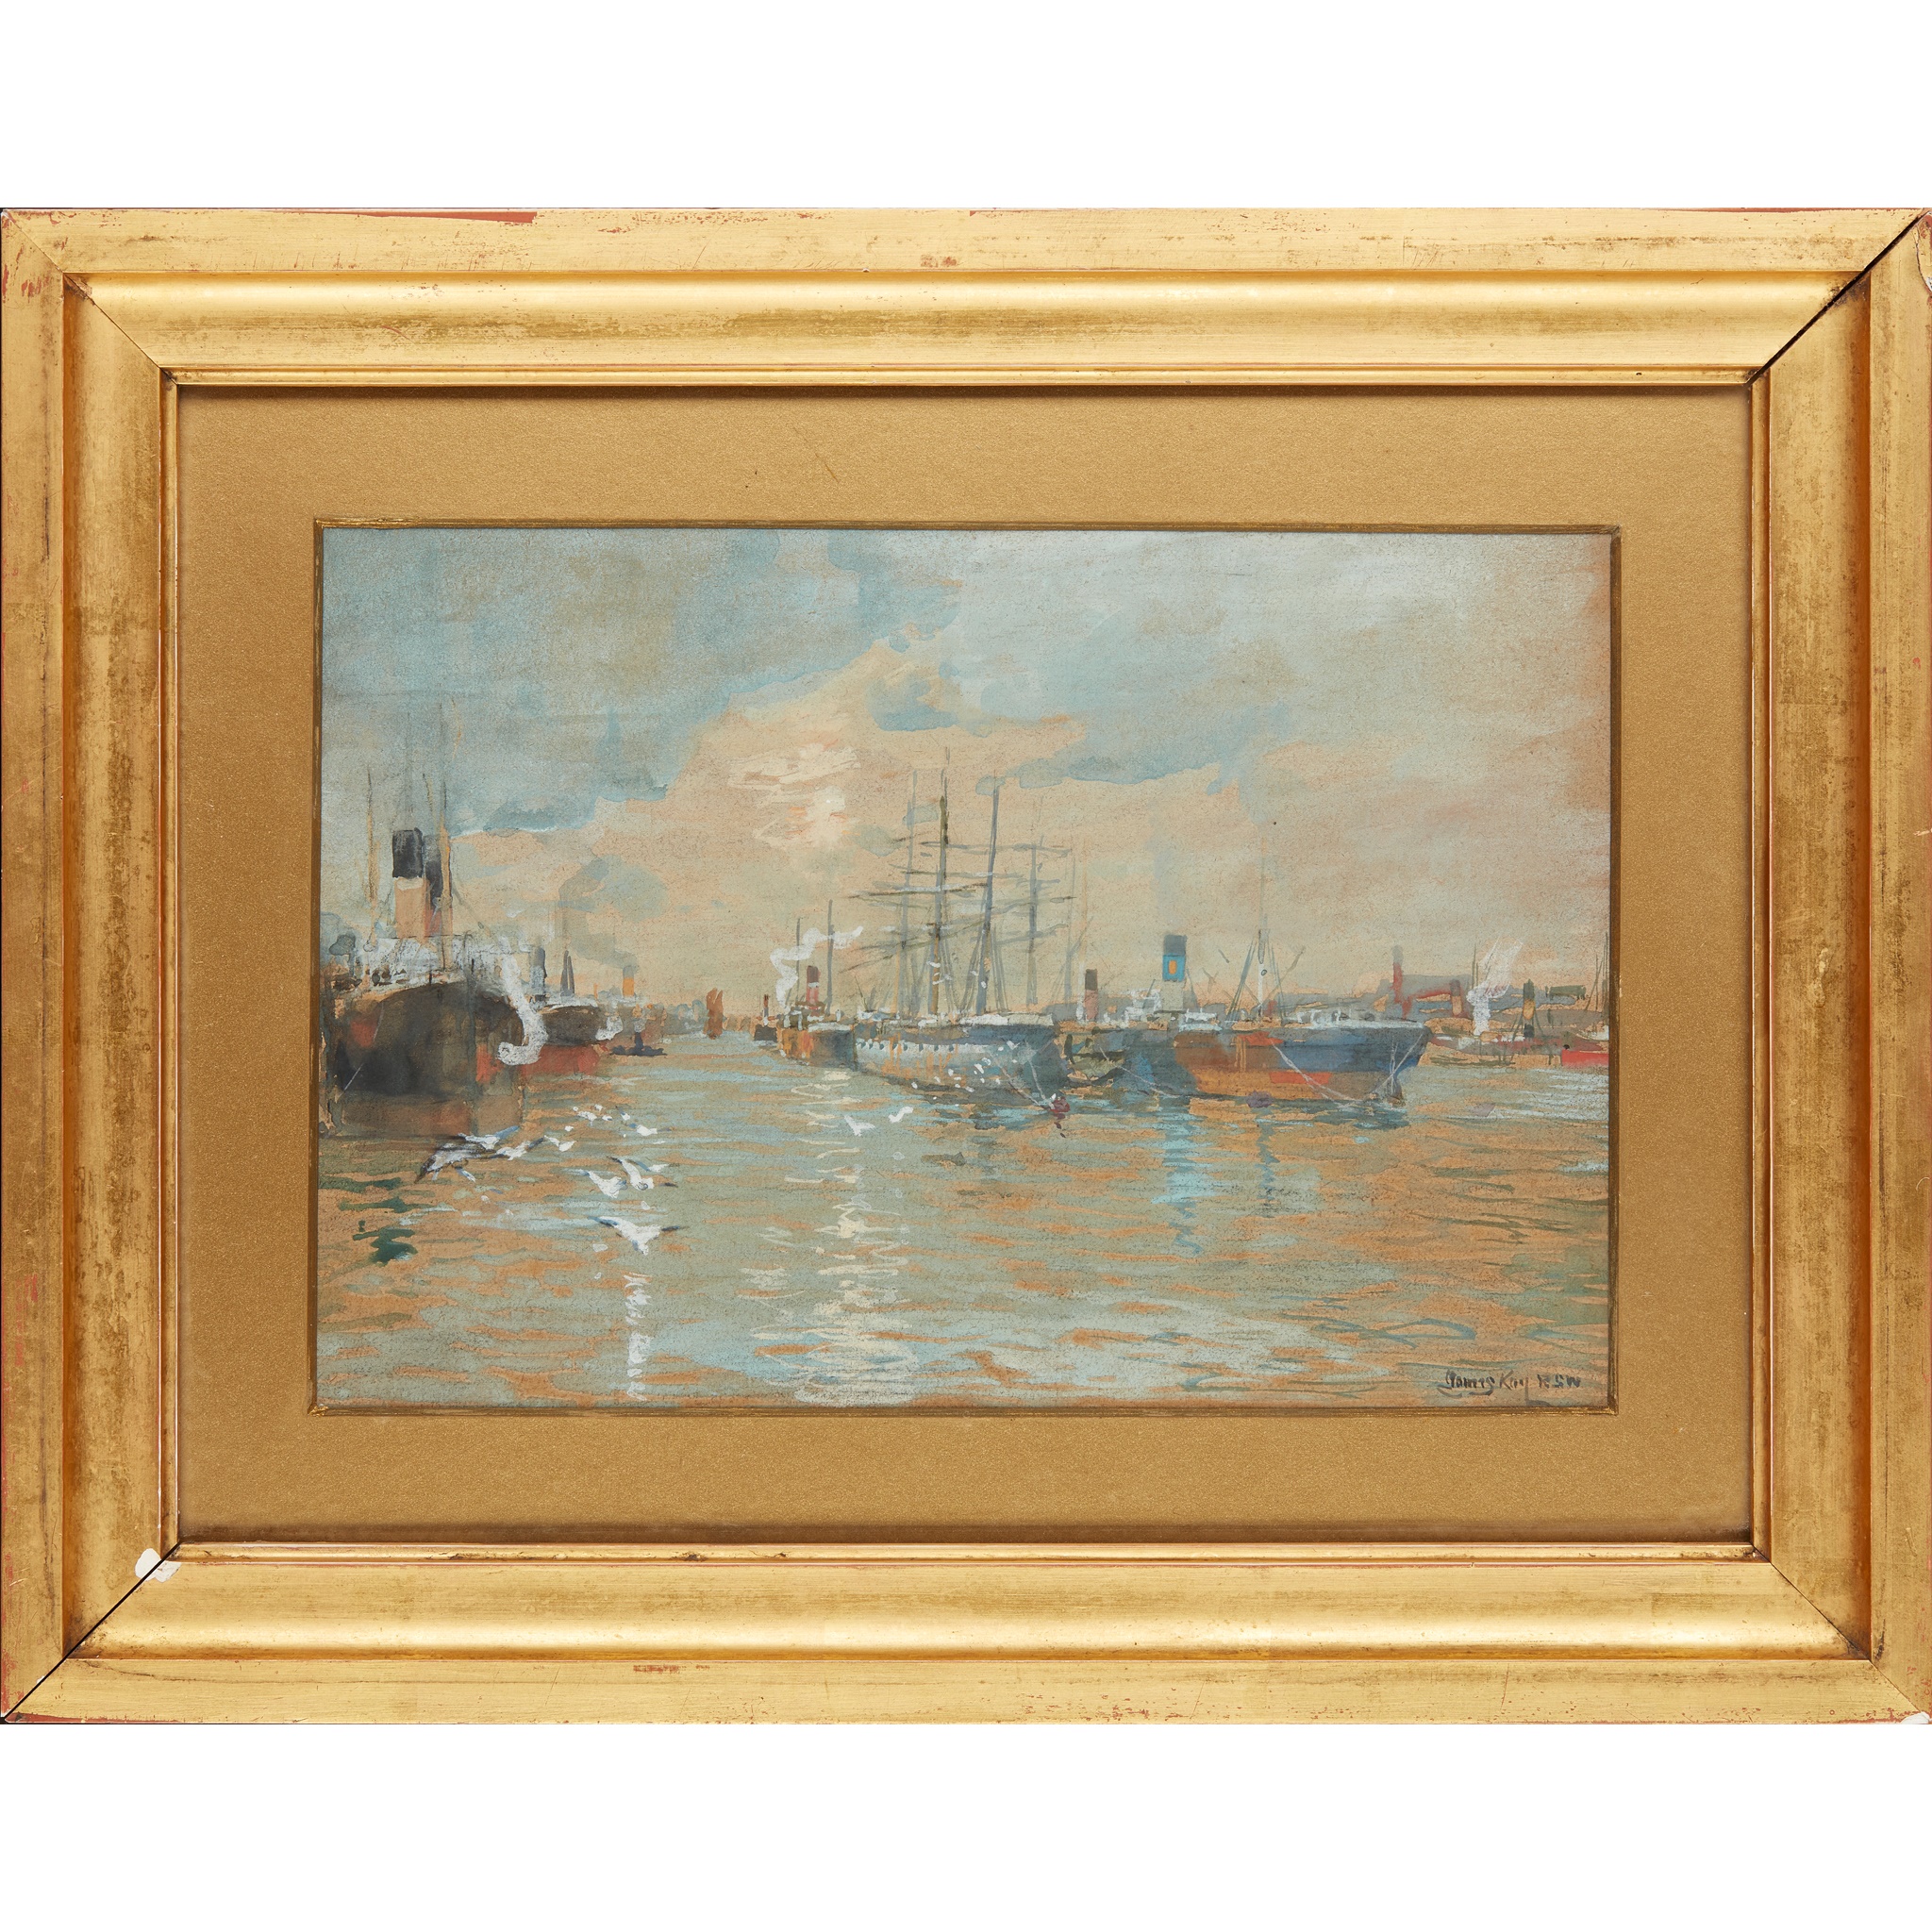 JAMES KAY R.S.A., R.S.W. (SCOTTISH 1858-1942) HARBOUR SCENE - Image 2 of 3